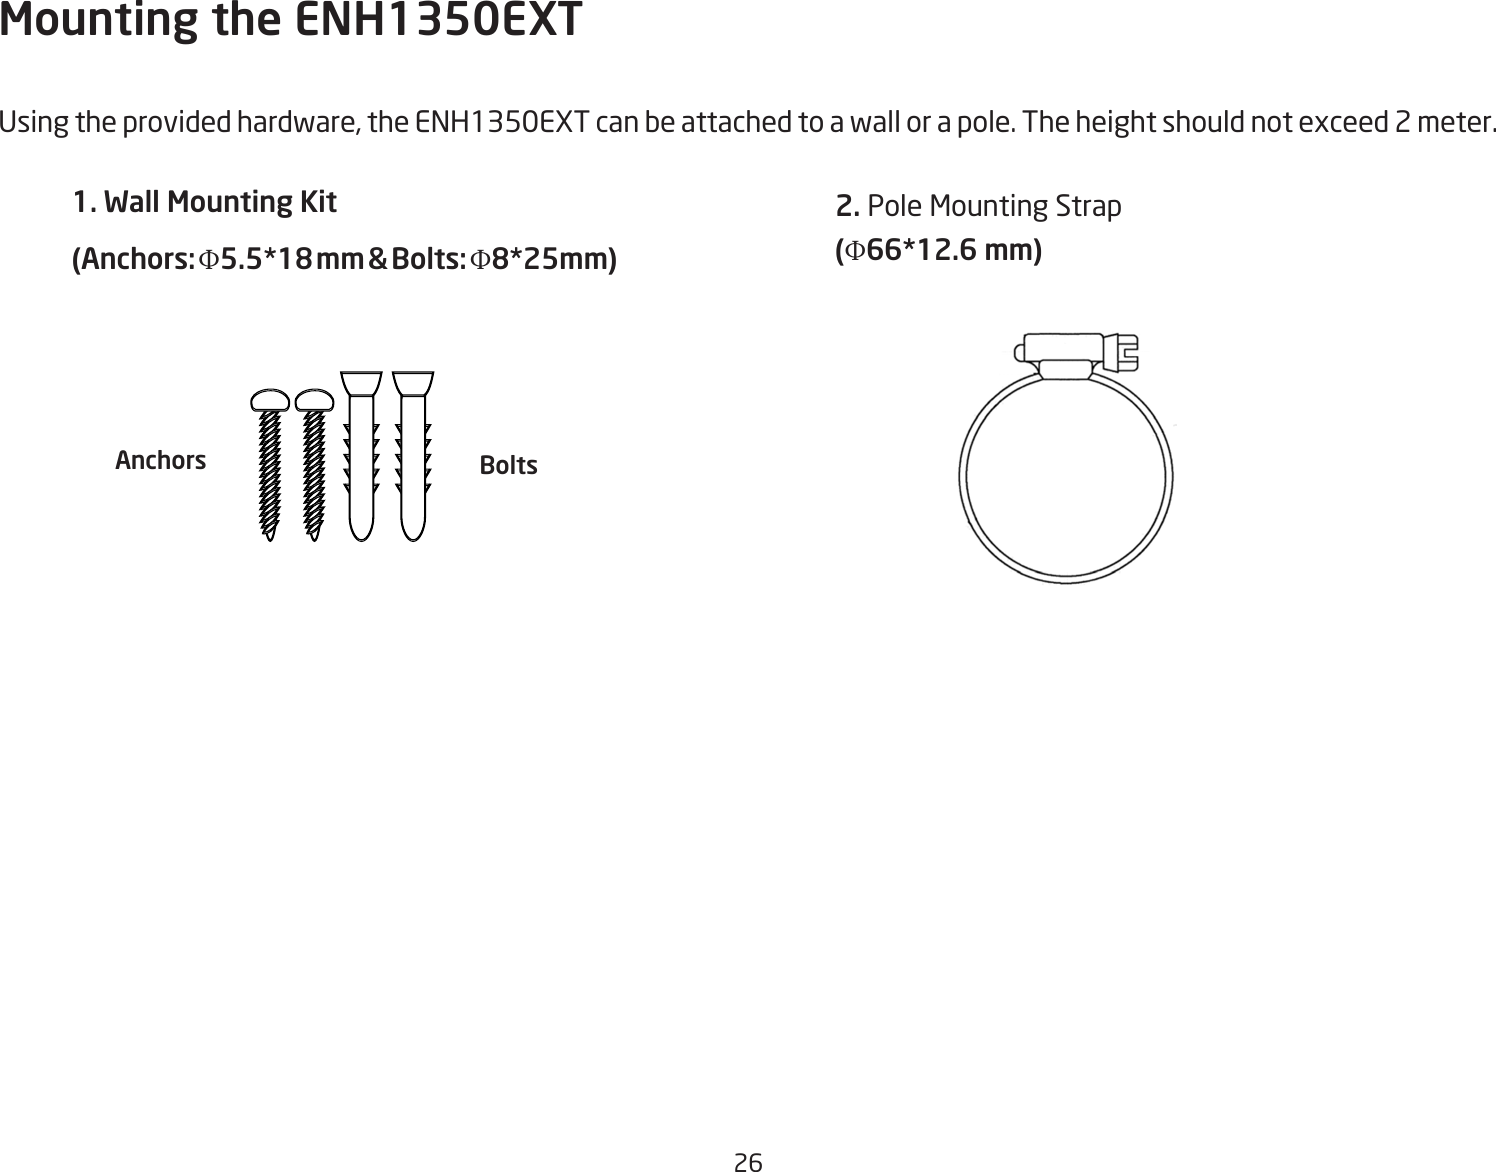 26Mounting the ENH1350EXTUsing the provided hardware, the ENH1350EXT can be attached to a wall or a pole. The height should not exceed 2 meter.1. Wall Mounting Kit (Anchors: Φ5.5*18 mm &amp; Bolts: Φ8*25mm) 2. Pole Mounting Strap(Φ66*12.6 mm)Anchors Bolts